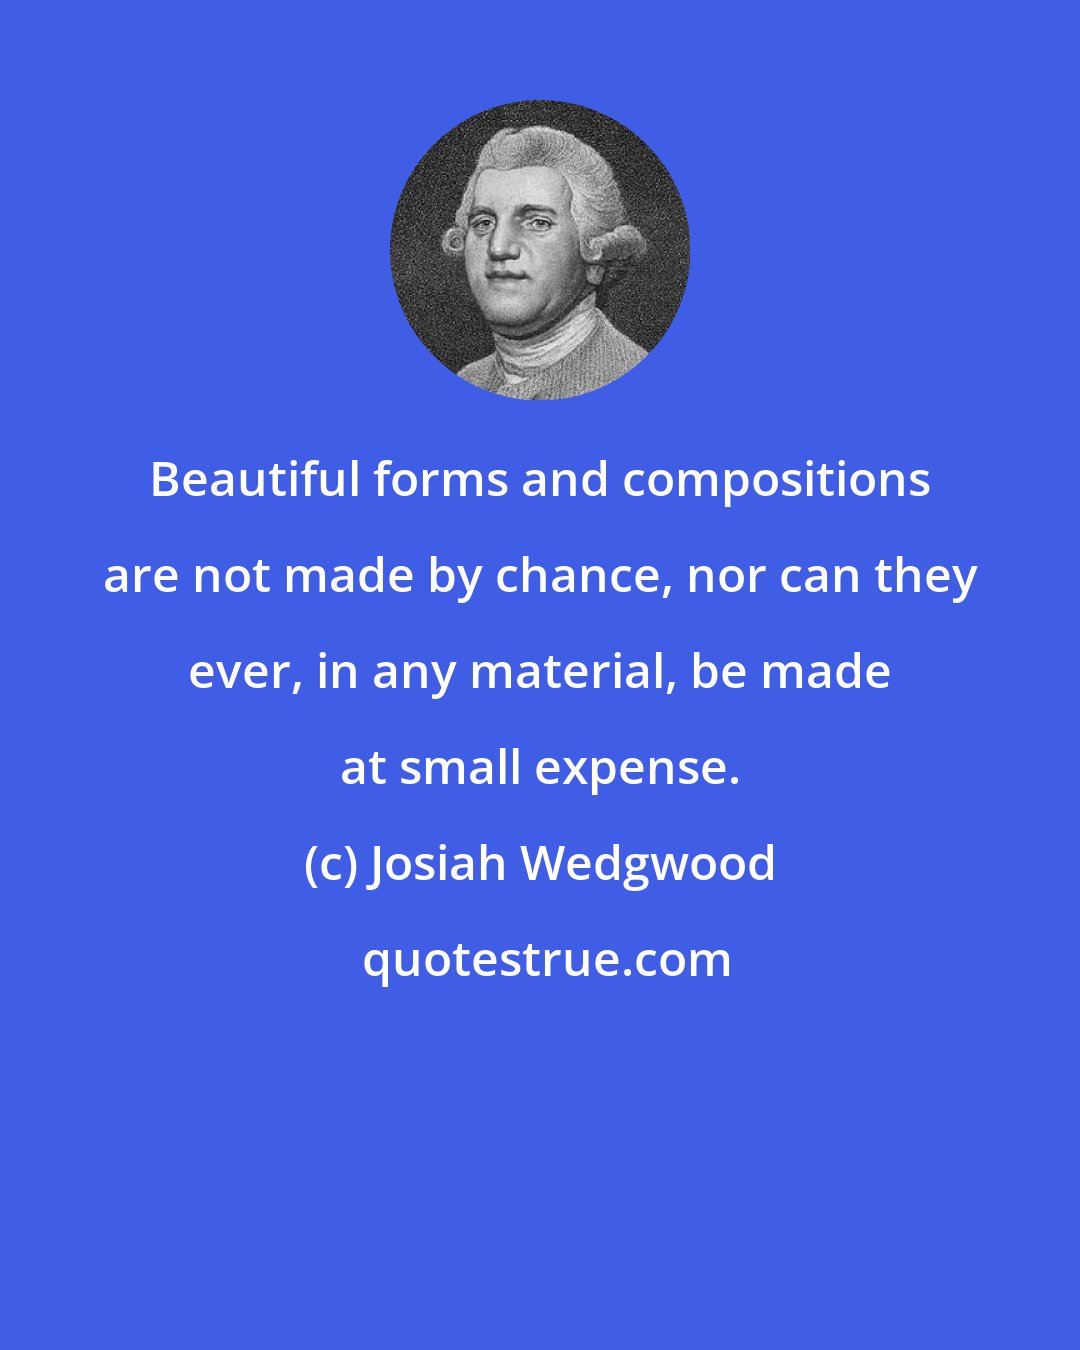 Josiah Wedgwood: Beautiful forms and compositions are not made by chance, nor can they ever, in any material, be made at small expense.